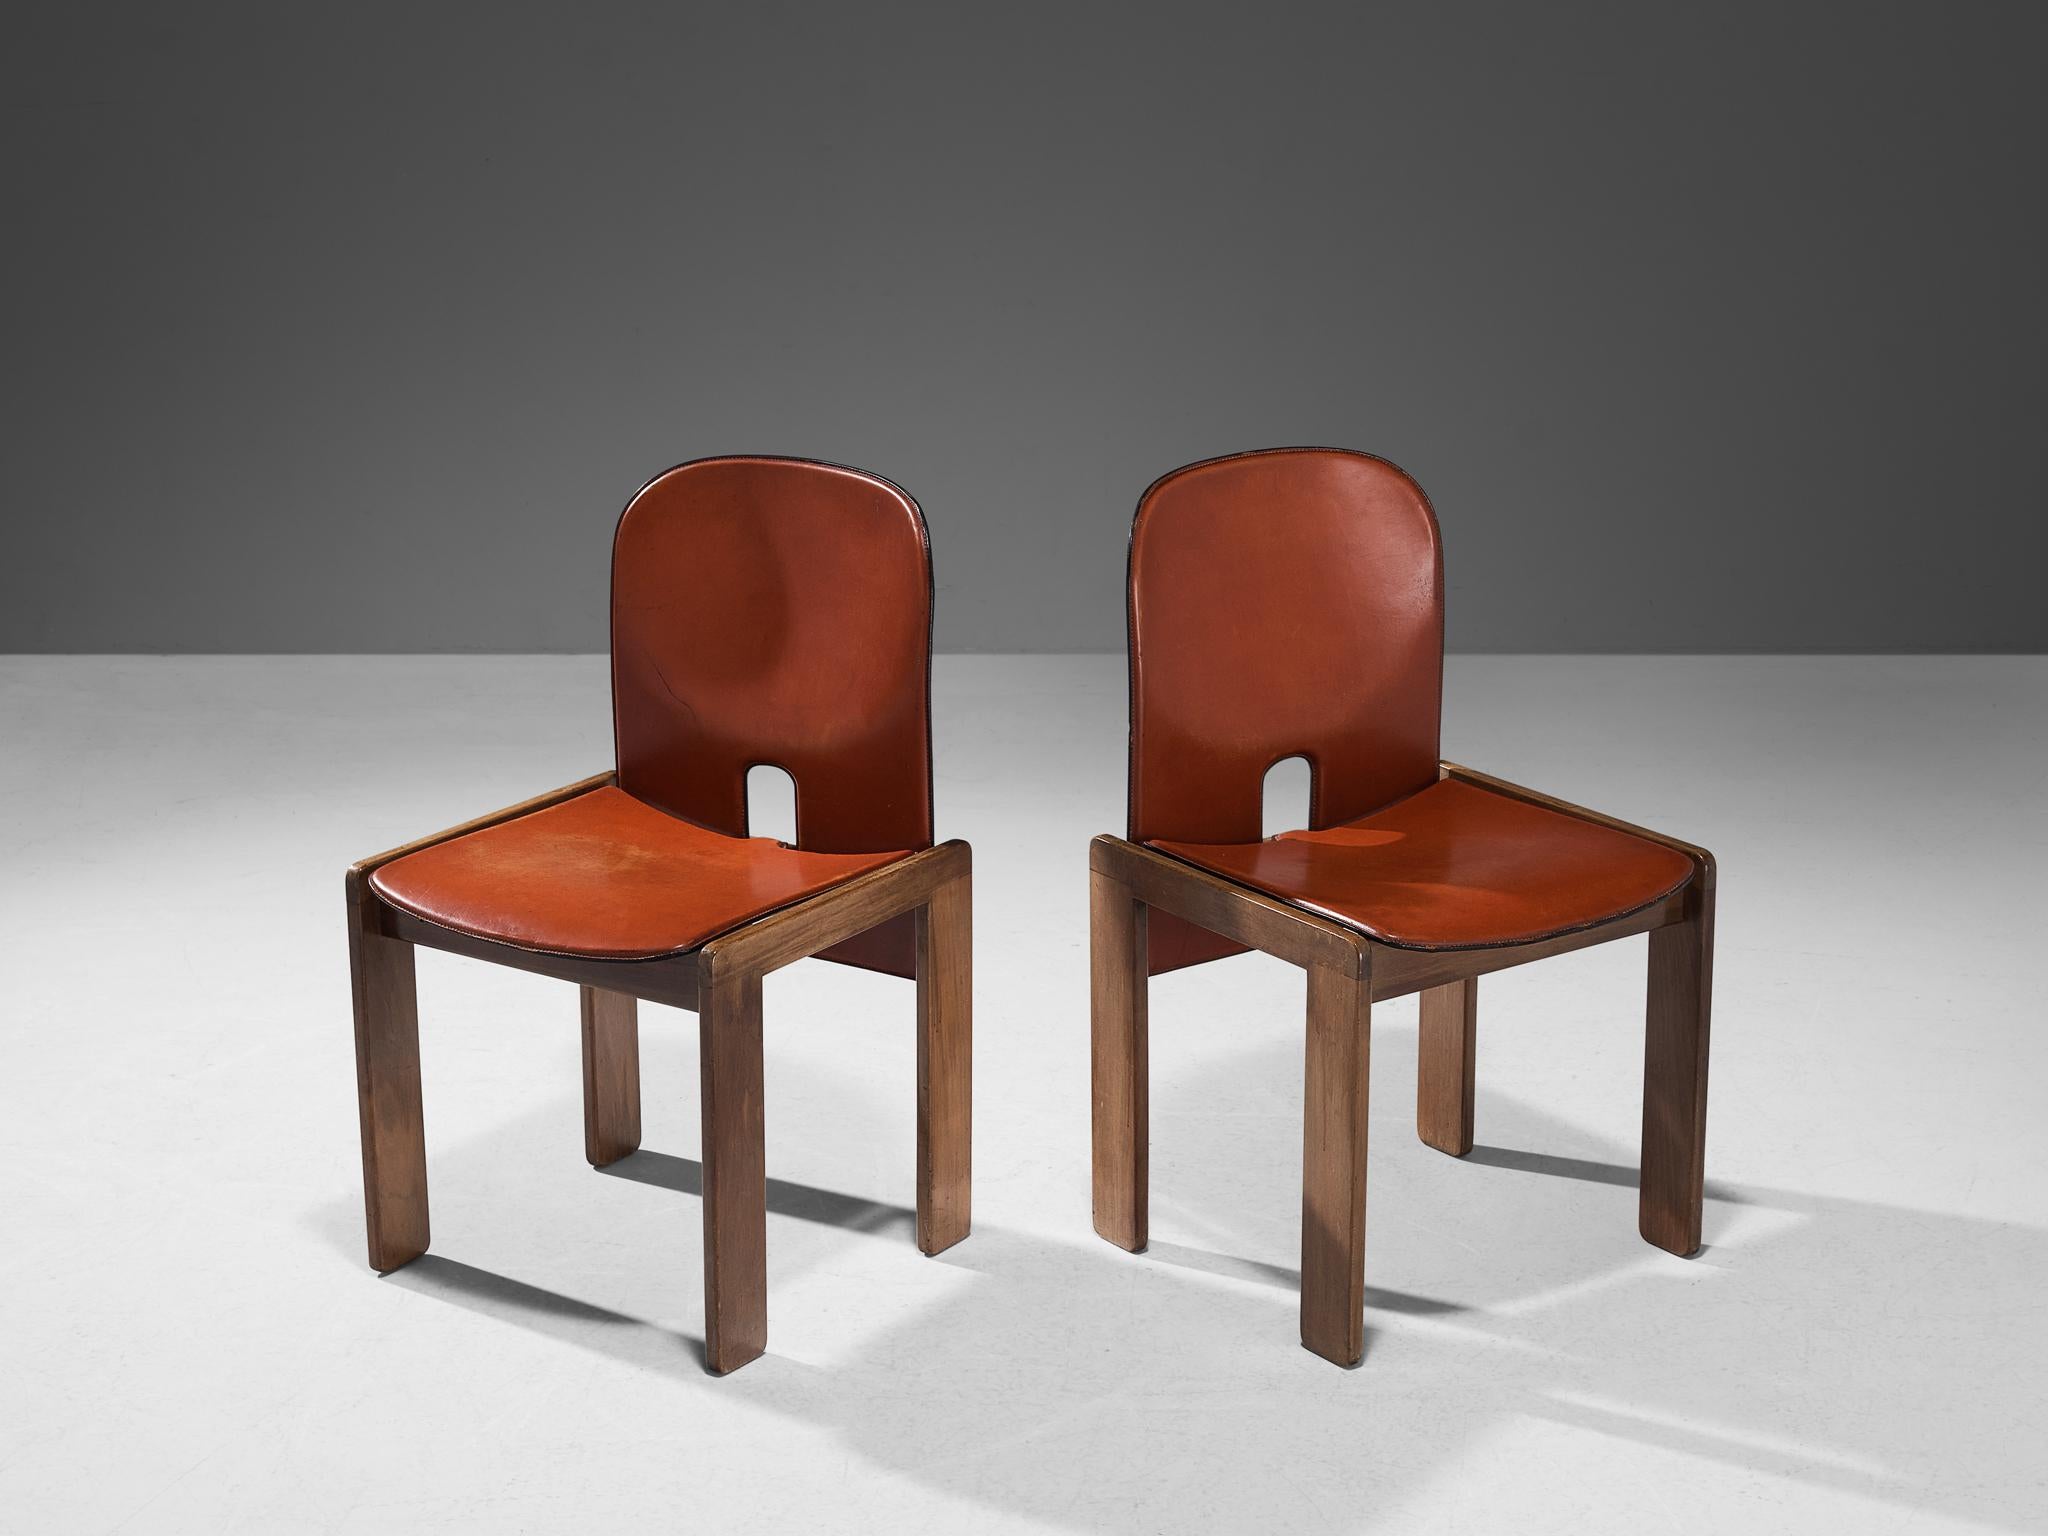 Afra & Tobia Scarpa for Cassina, pair of dining chairs model '121', walnut, leather, Italy, design 1965

Pair of chairs by the Italian designer couple Tobia & Afra Scarpa. These chairs have a cubic and architectural appearance. The base consists of